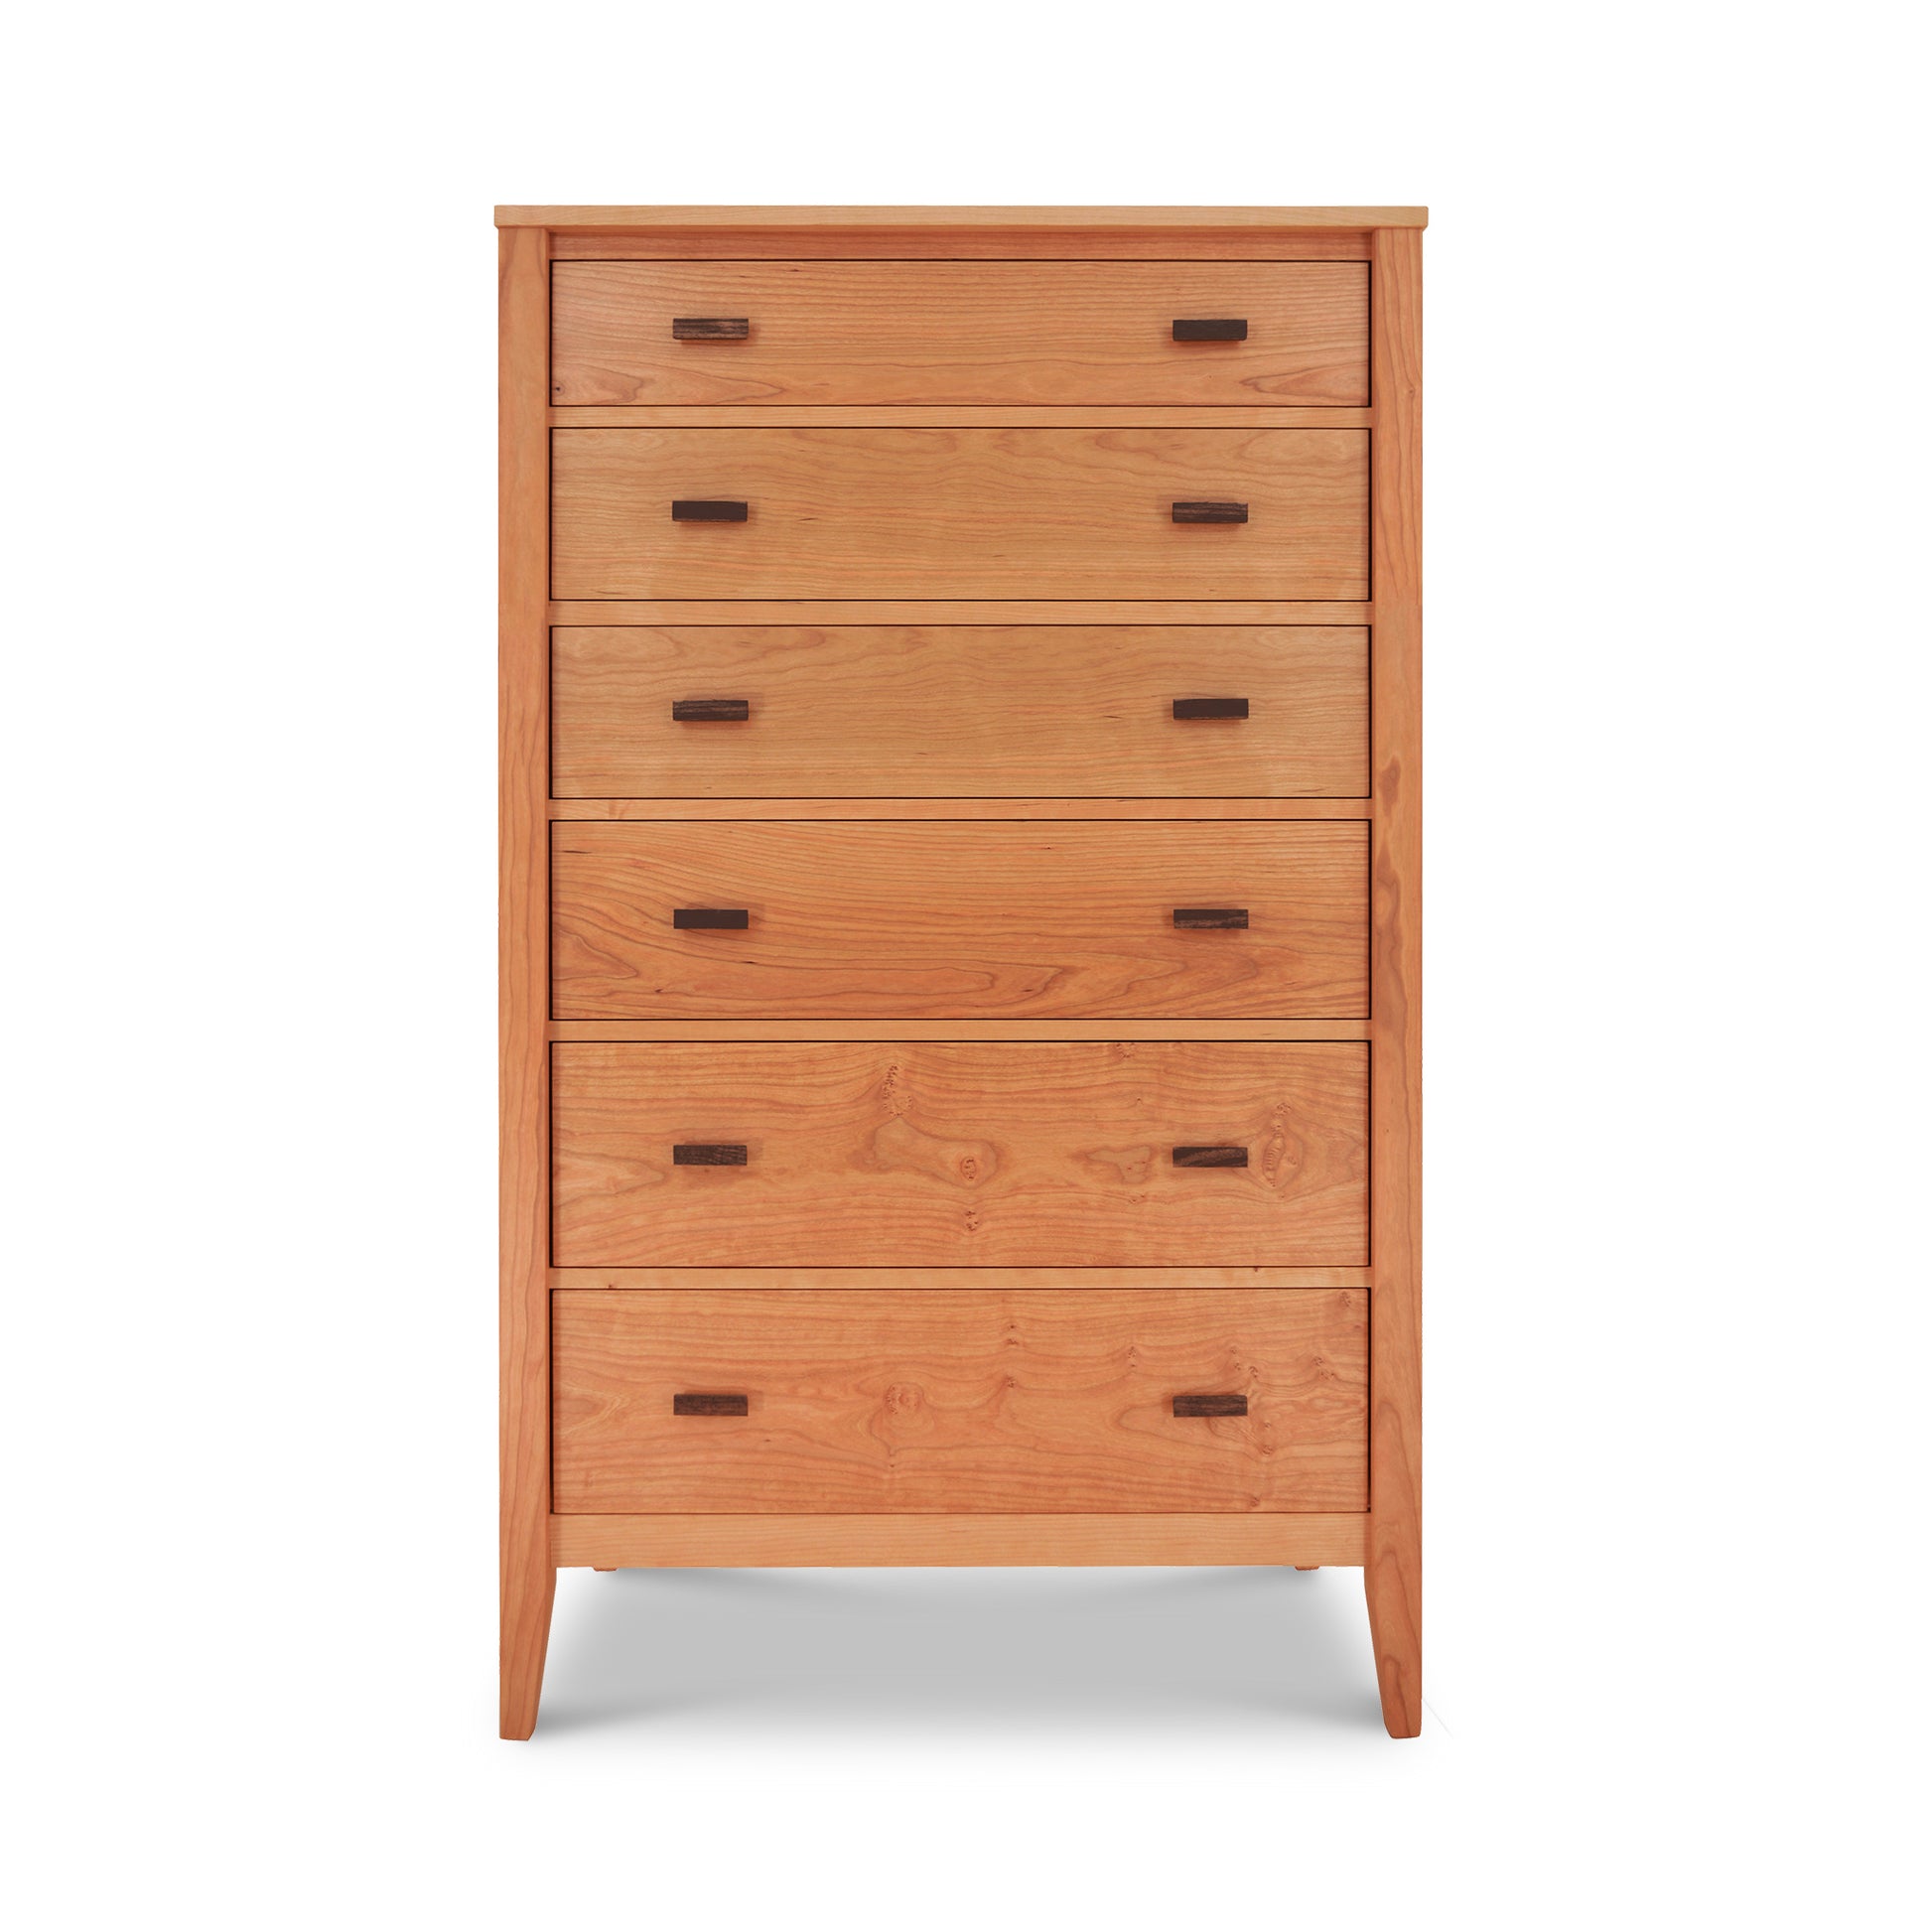 A tall, wooden dresser made from sustainably harvested natural cherry, with six evenly spaced drawers, each featuring a simple horizontal pull-handle, standing against a plain white background. This is the Andover Modern 6-Drawer Chest by Maple Corner Woodworks.